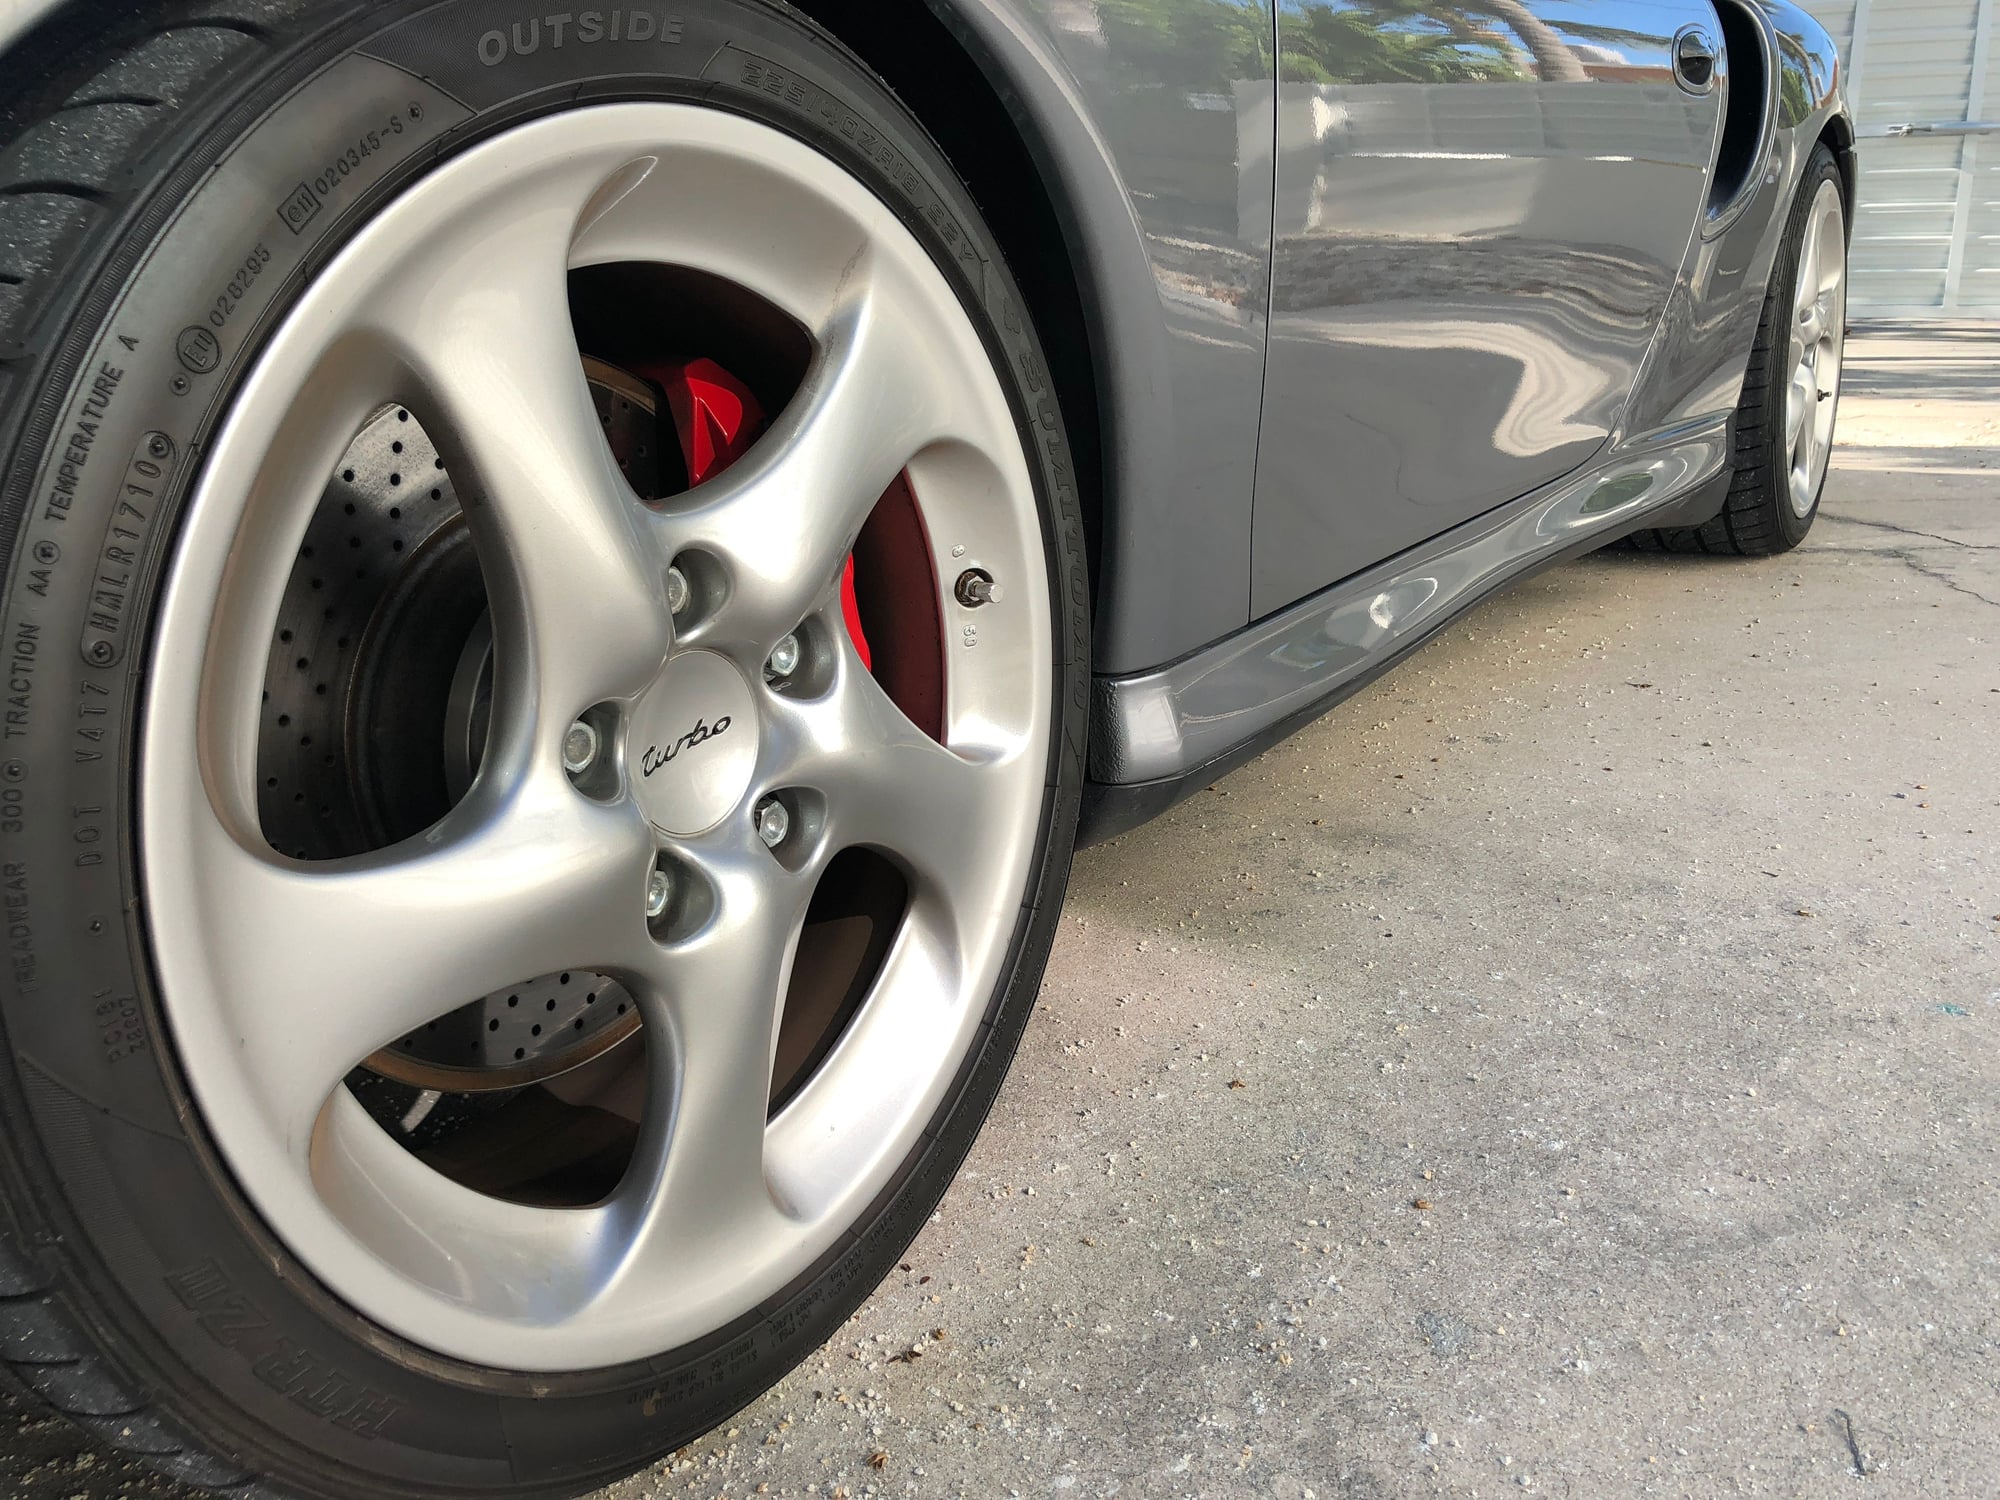 2003 Porsche 911 - 2003 996 Turbo For Sale - Seal Grey - Used - VIN WP0AB29983S686552 - 56,855 Miles - 6 cyl - Manual - Coupe - Silver - Key Largo, FL 33037, United States